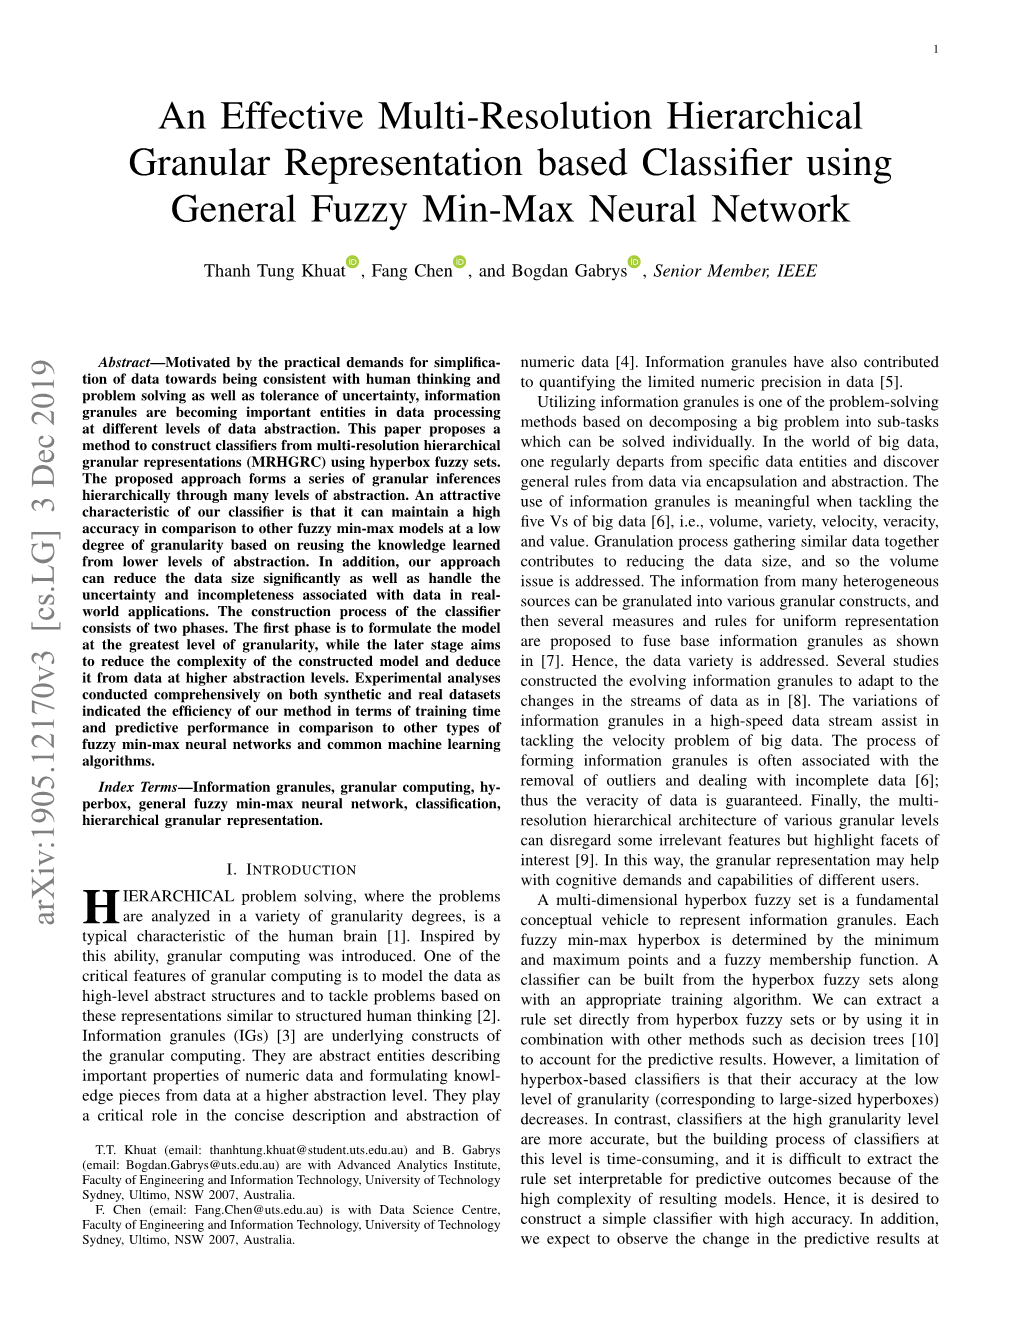 An Effective Multi-Resolution Hierarchical Granular Representation Based Classiﬁer Using General Fuzzy Min-Max Neural Network